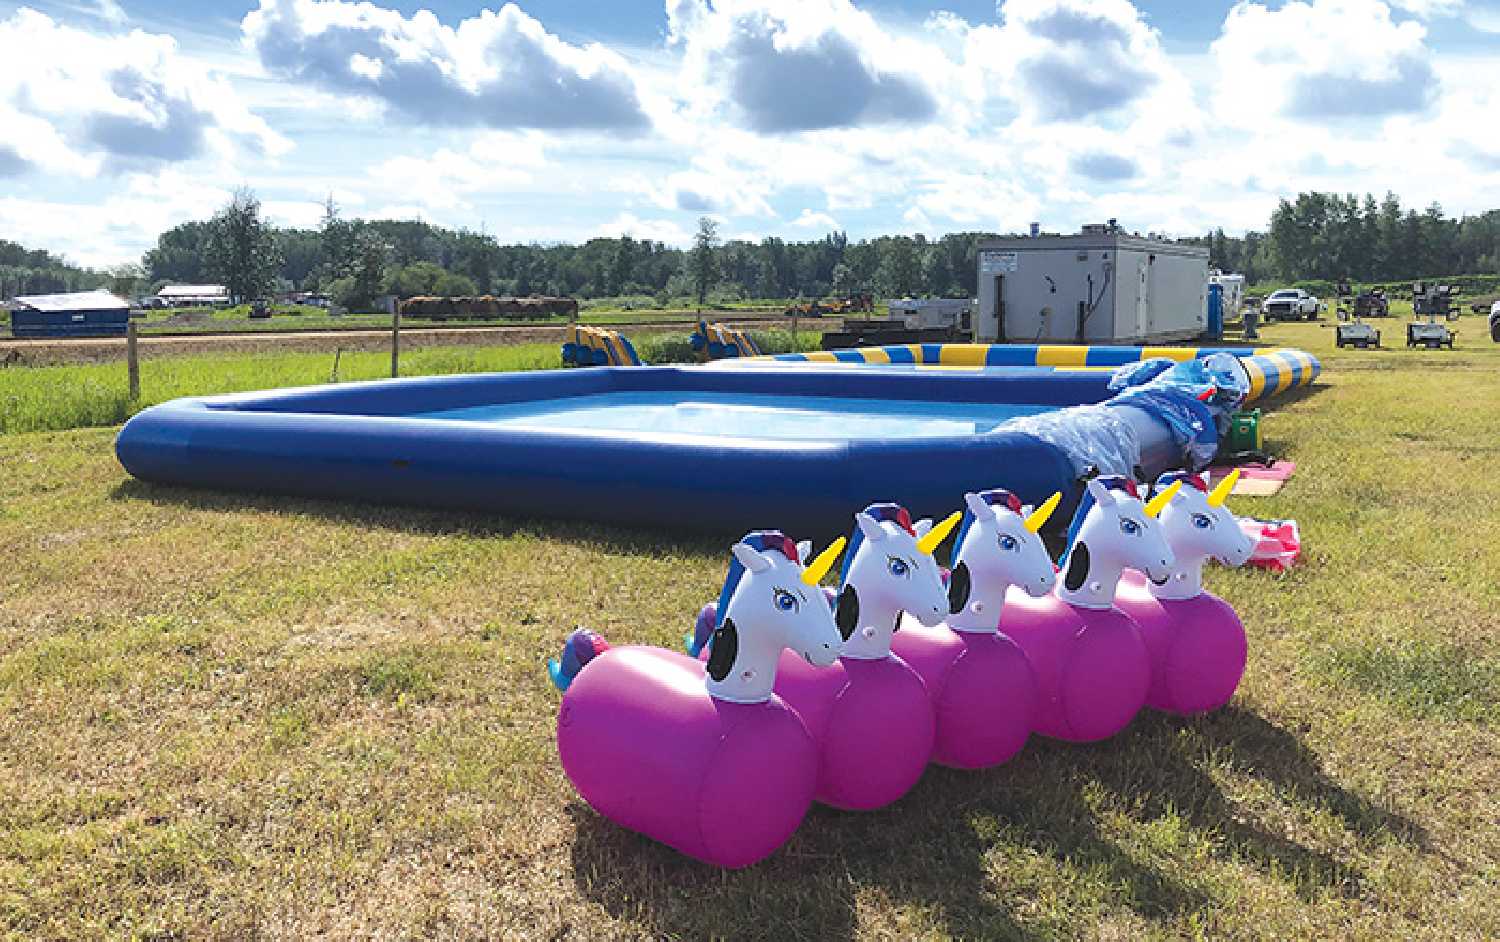 Wet & Wild will be bringing inflatable beach balls, hoppy horses, bouncy castles and a mechanical bull to Shrine-A-Rama Day in Moosomin on June 4, hosted by the Moosomin Shriner Club.